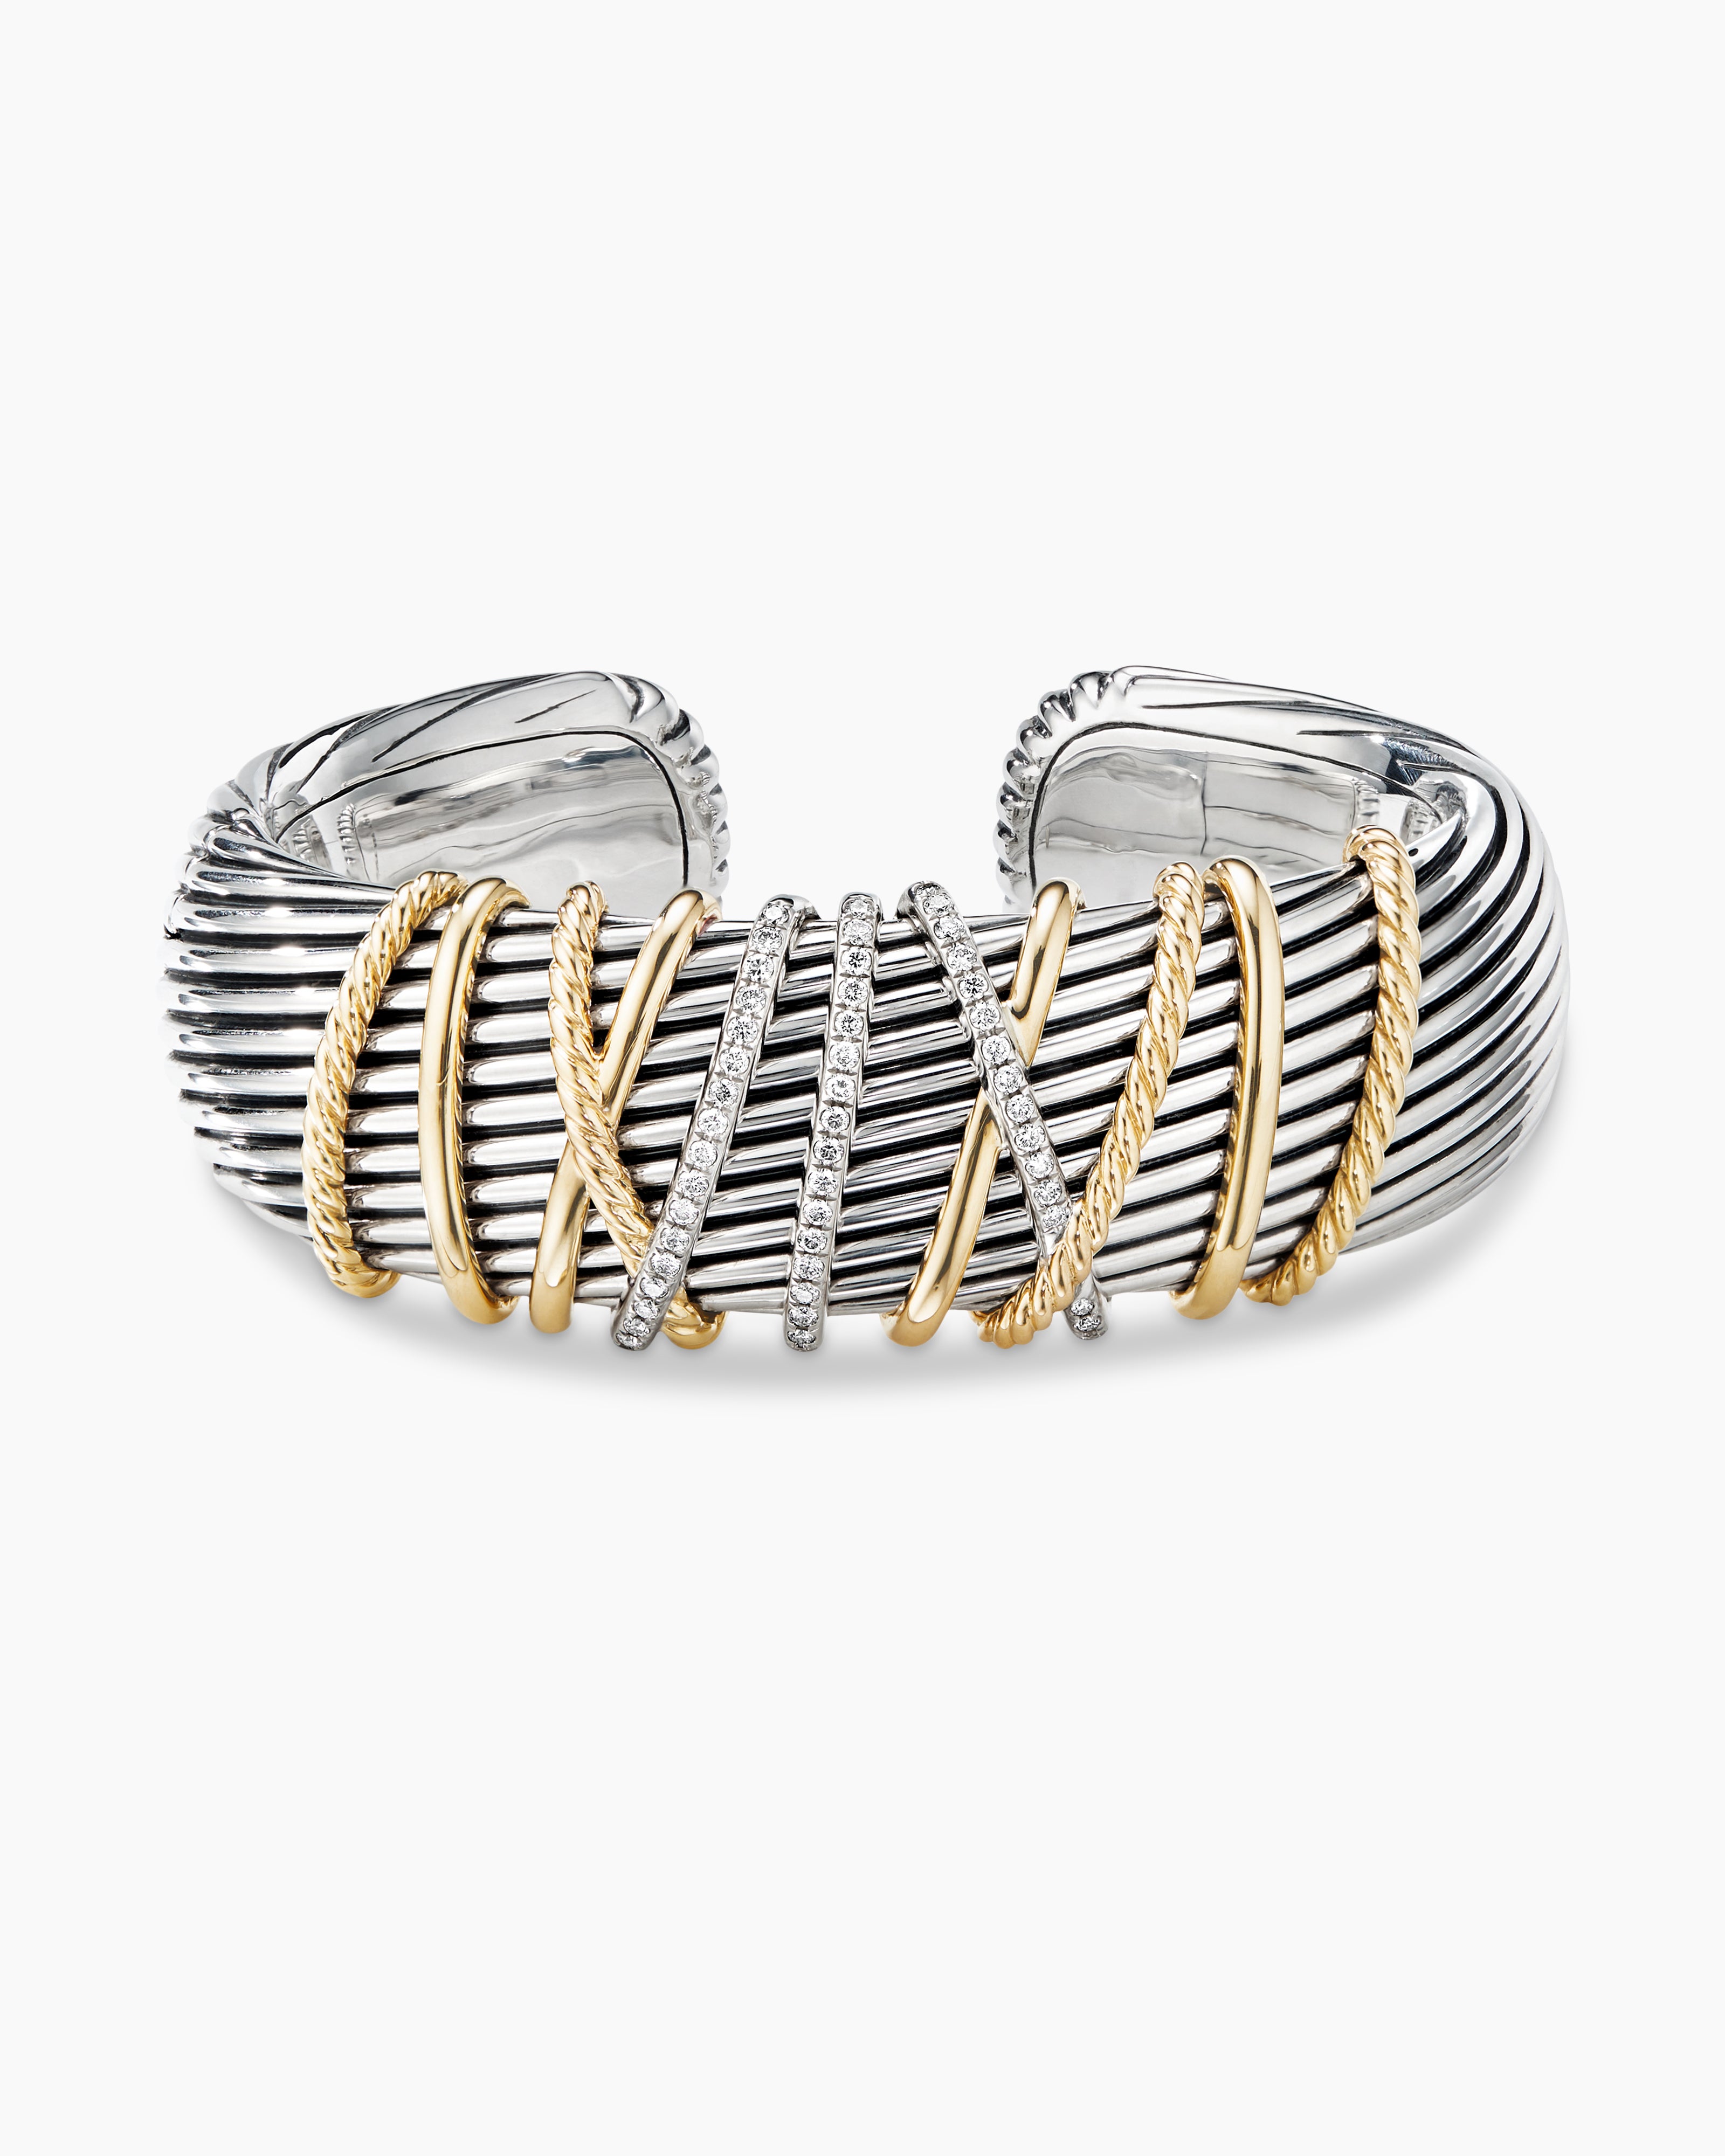 Success 18K Gold Over Sterling Silver Stacking Cuff Bracelet